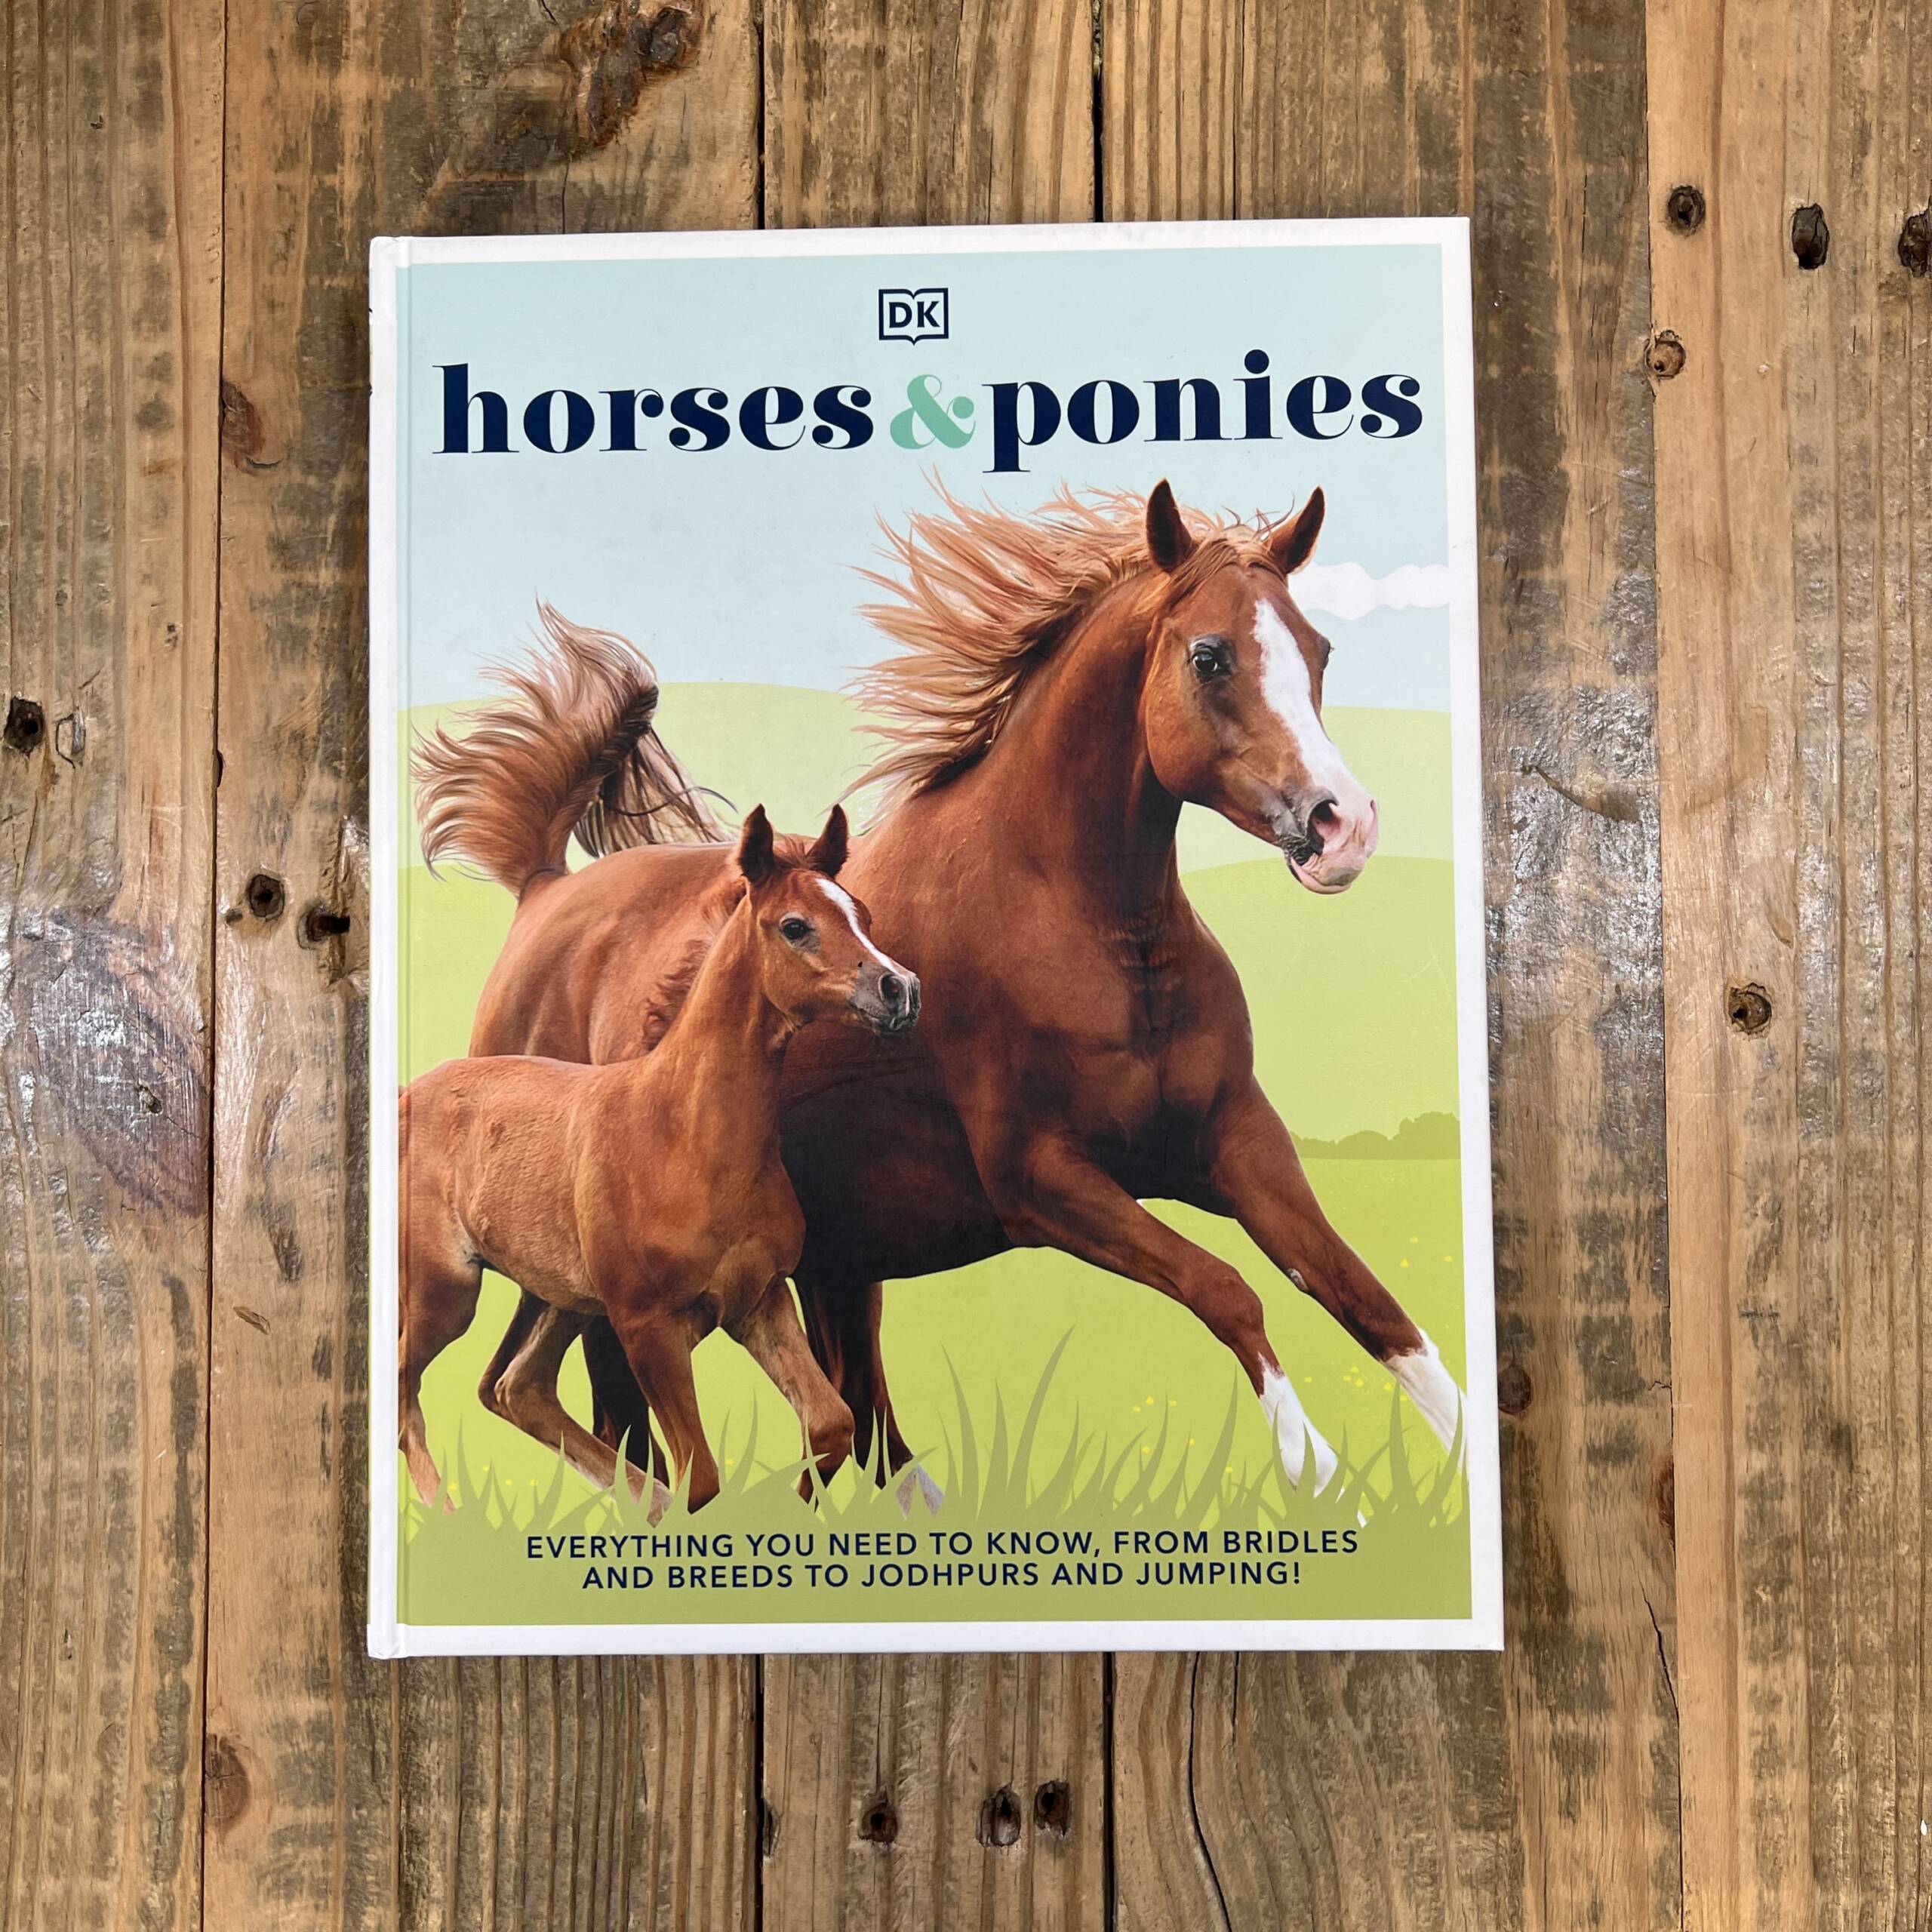 Horse Coloring Books for Girls ages 8-12: Gift Book for Horses